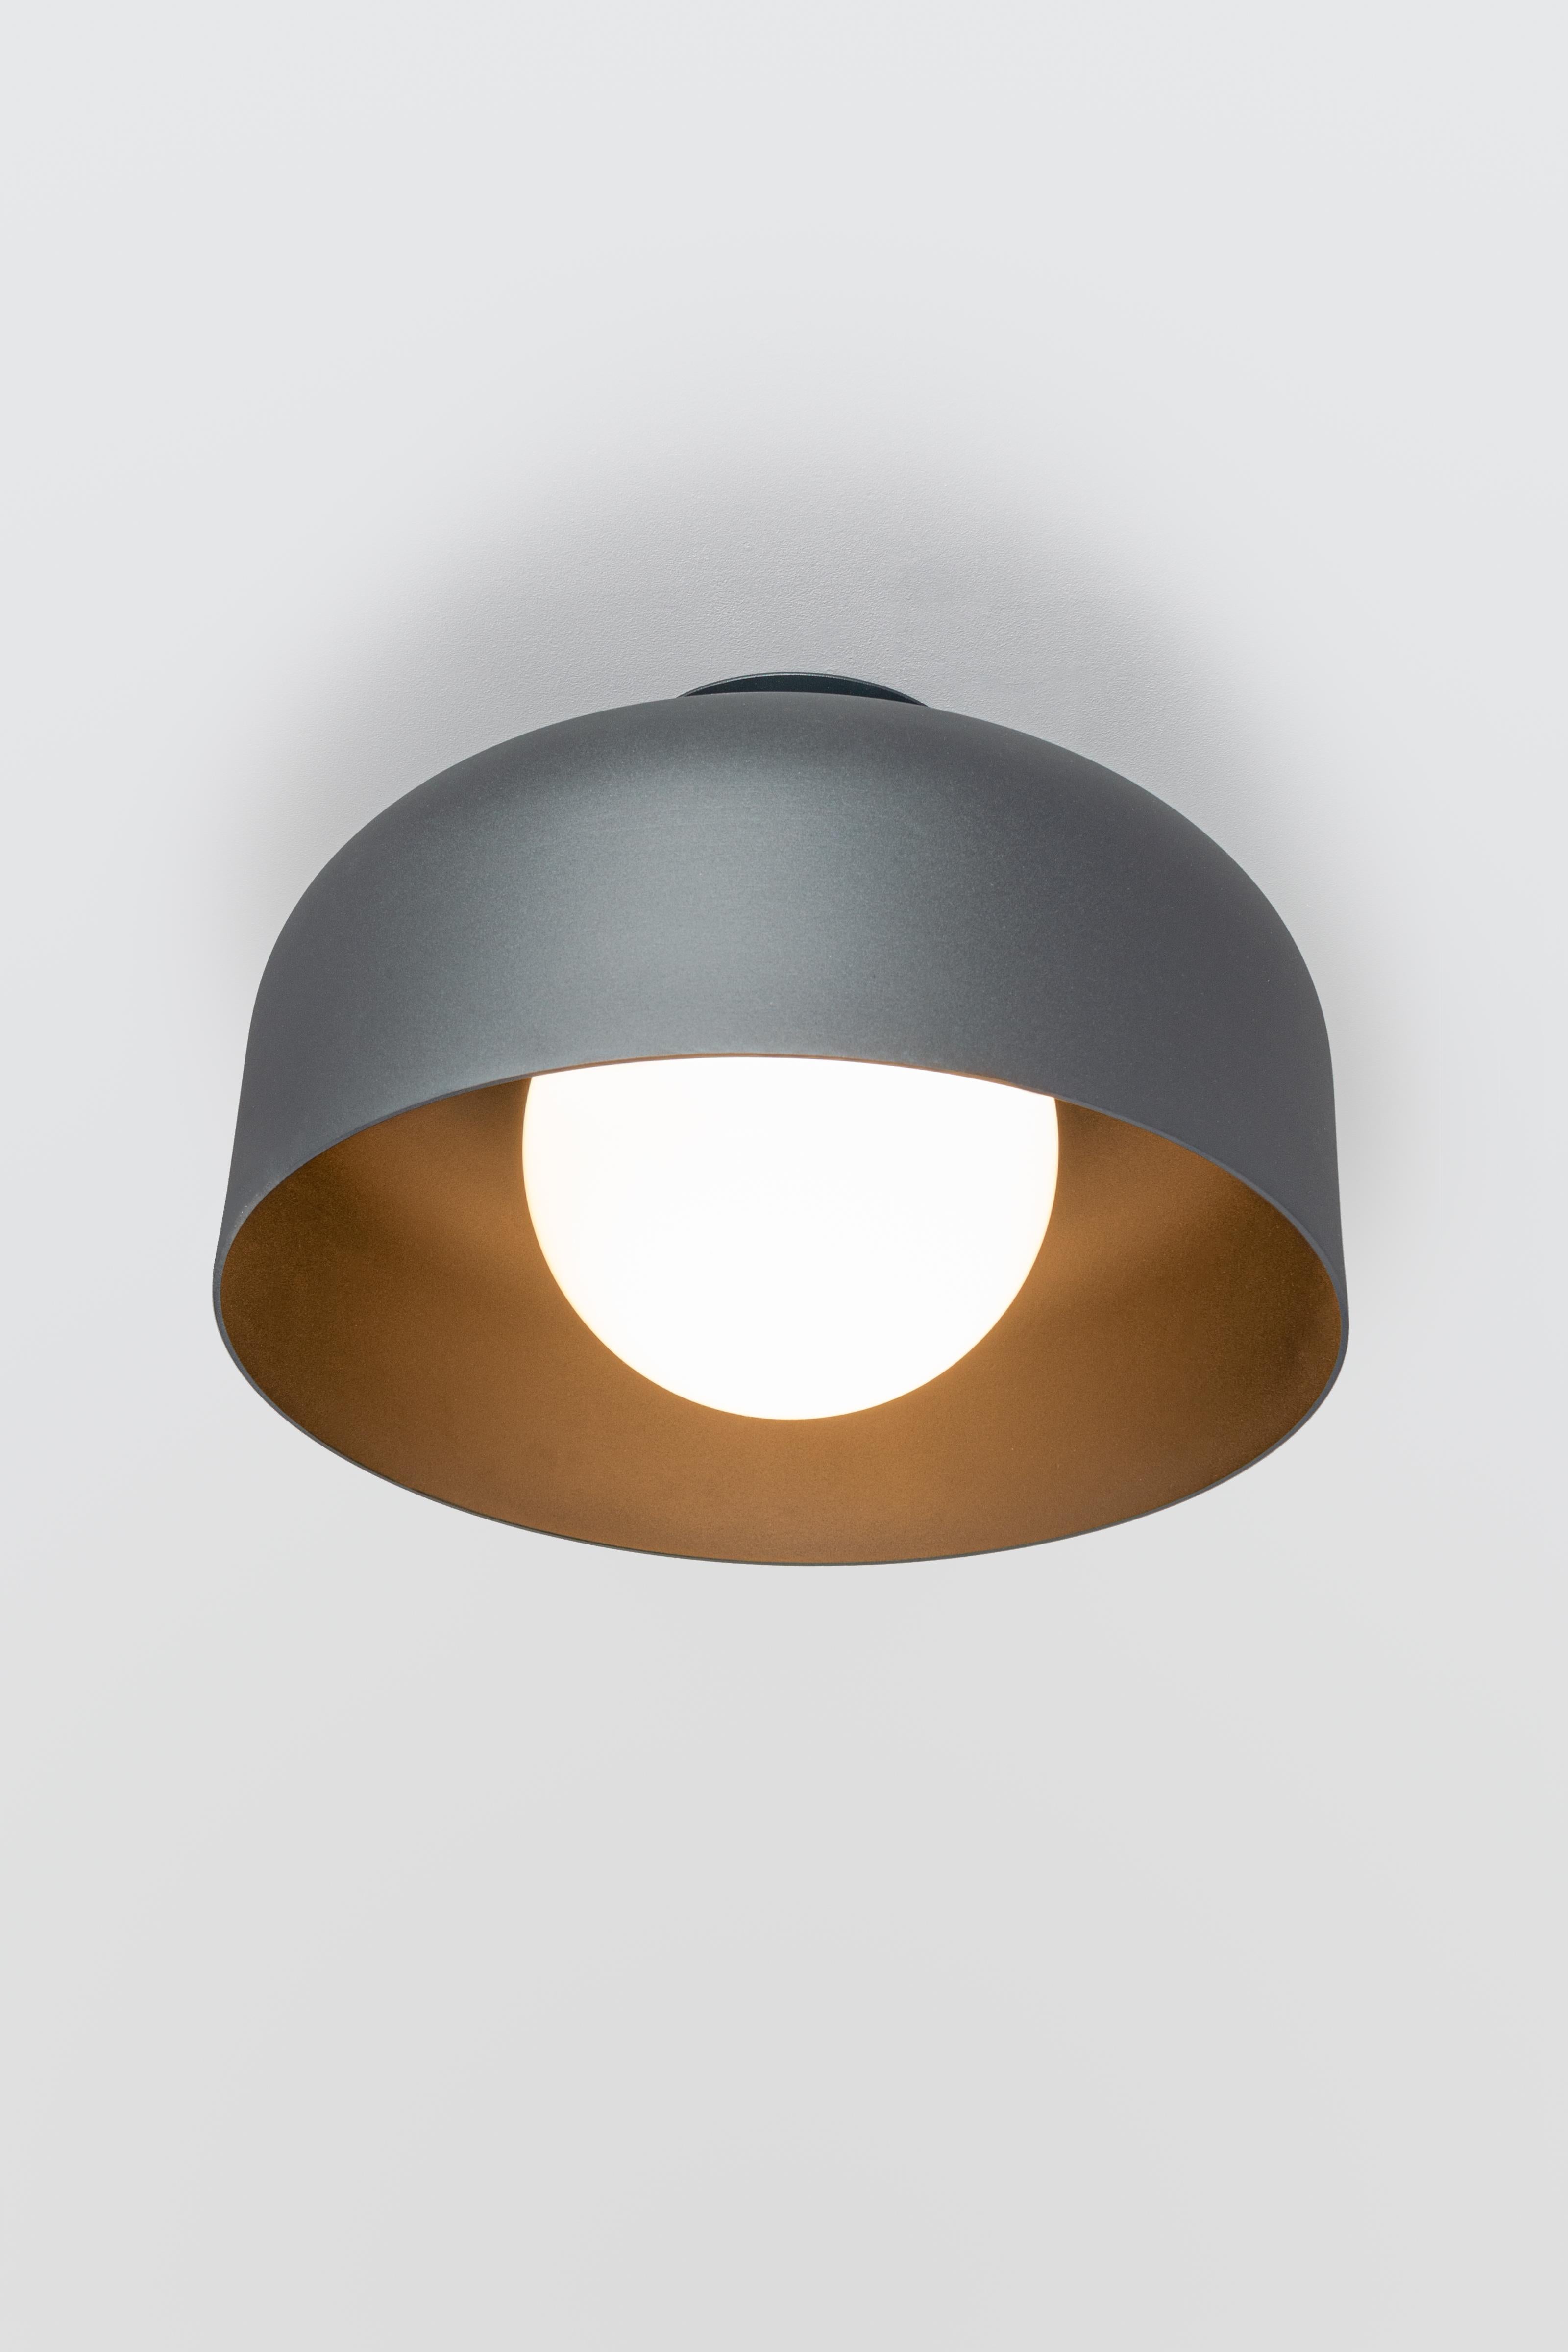 Spotlight Volumes, Ceiling / Wall Lamp B (avocado) In New Condition For Sale In Paris, FR